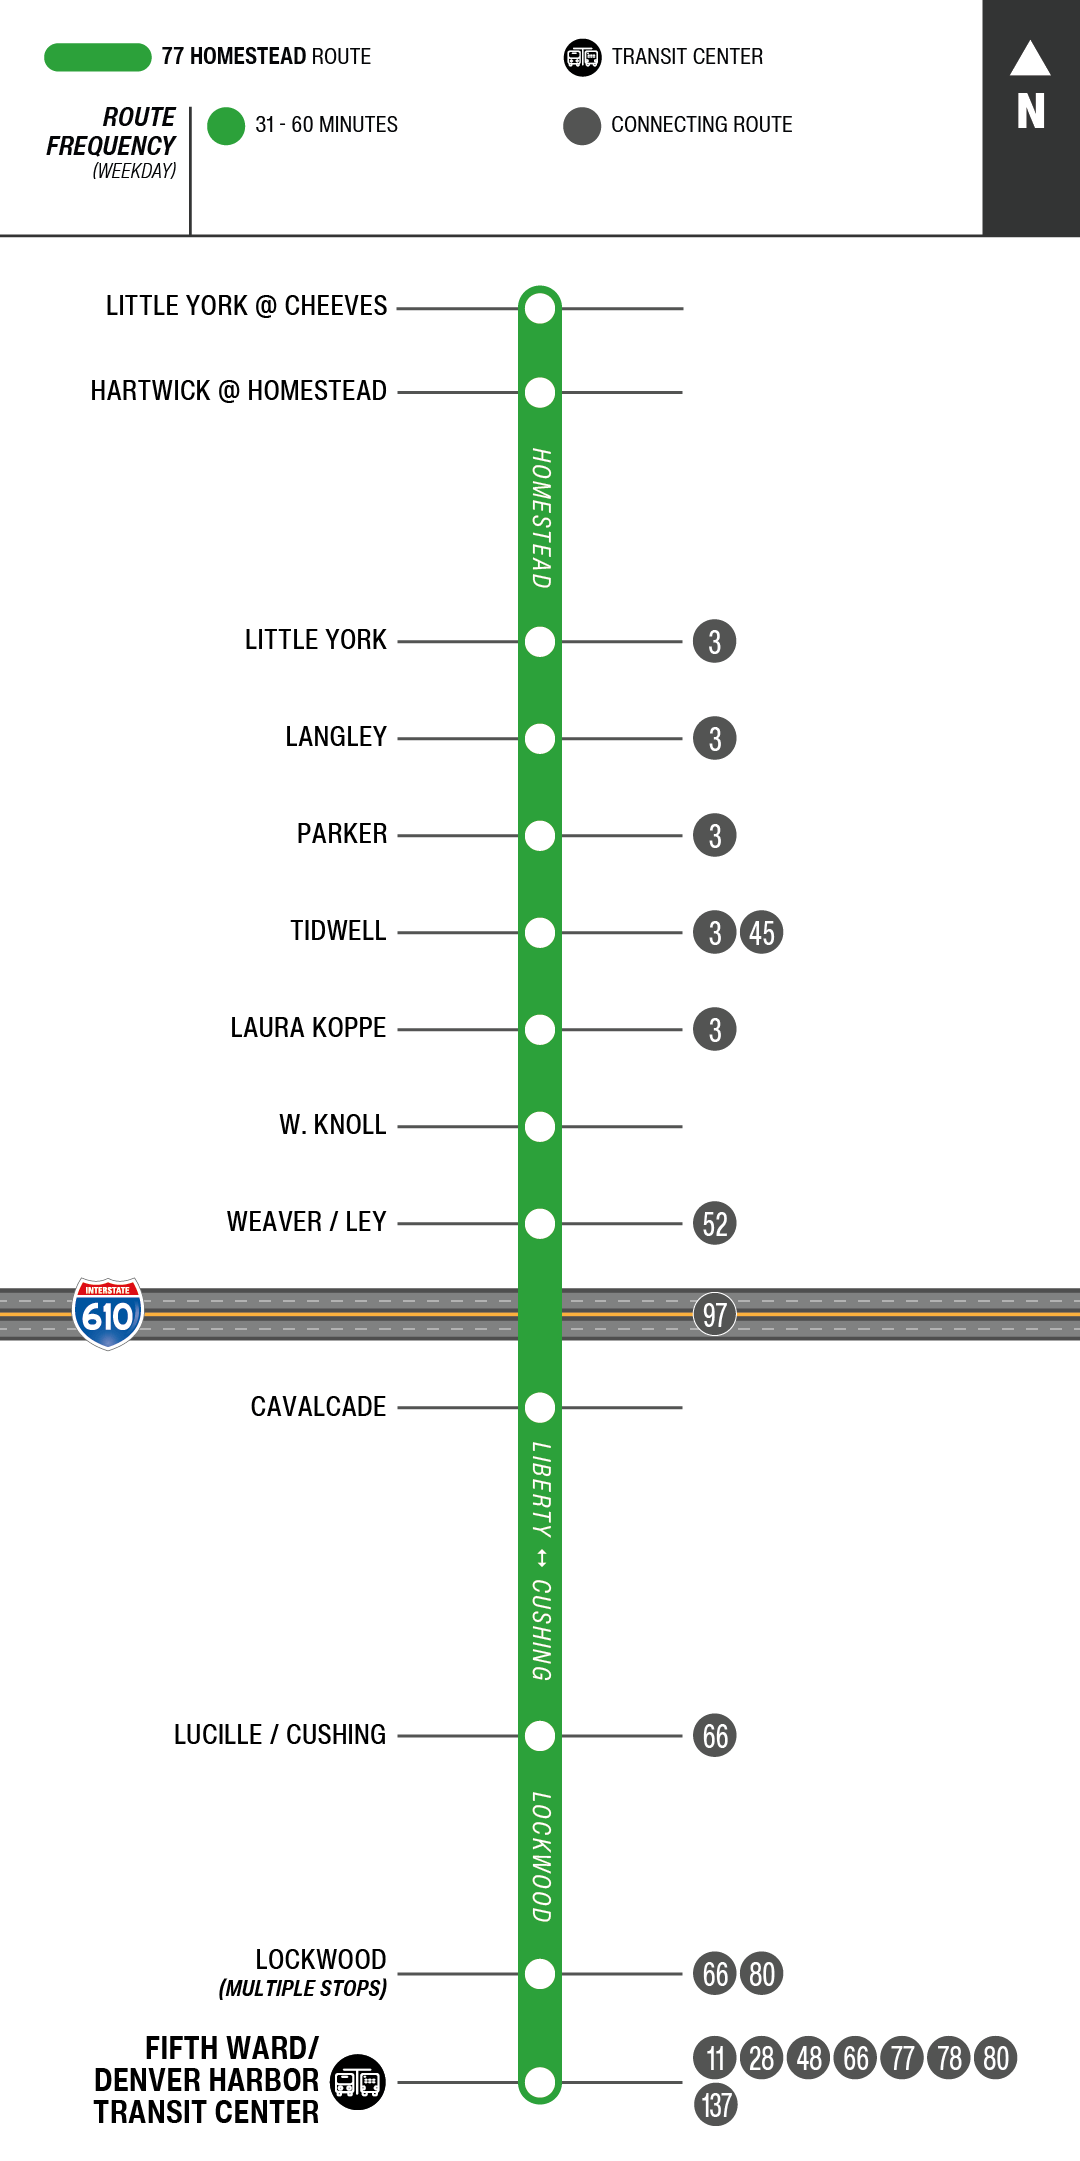 Route map for 77 Homestead bus